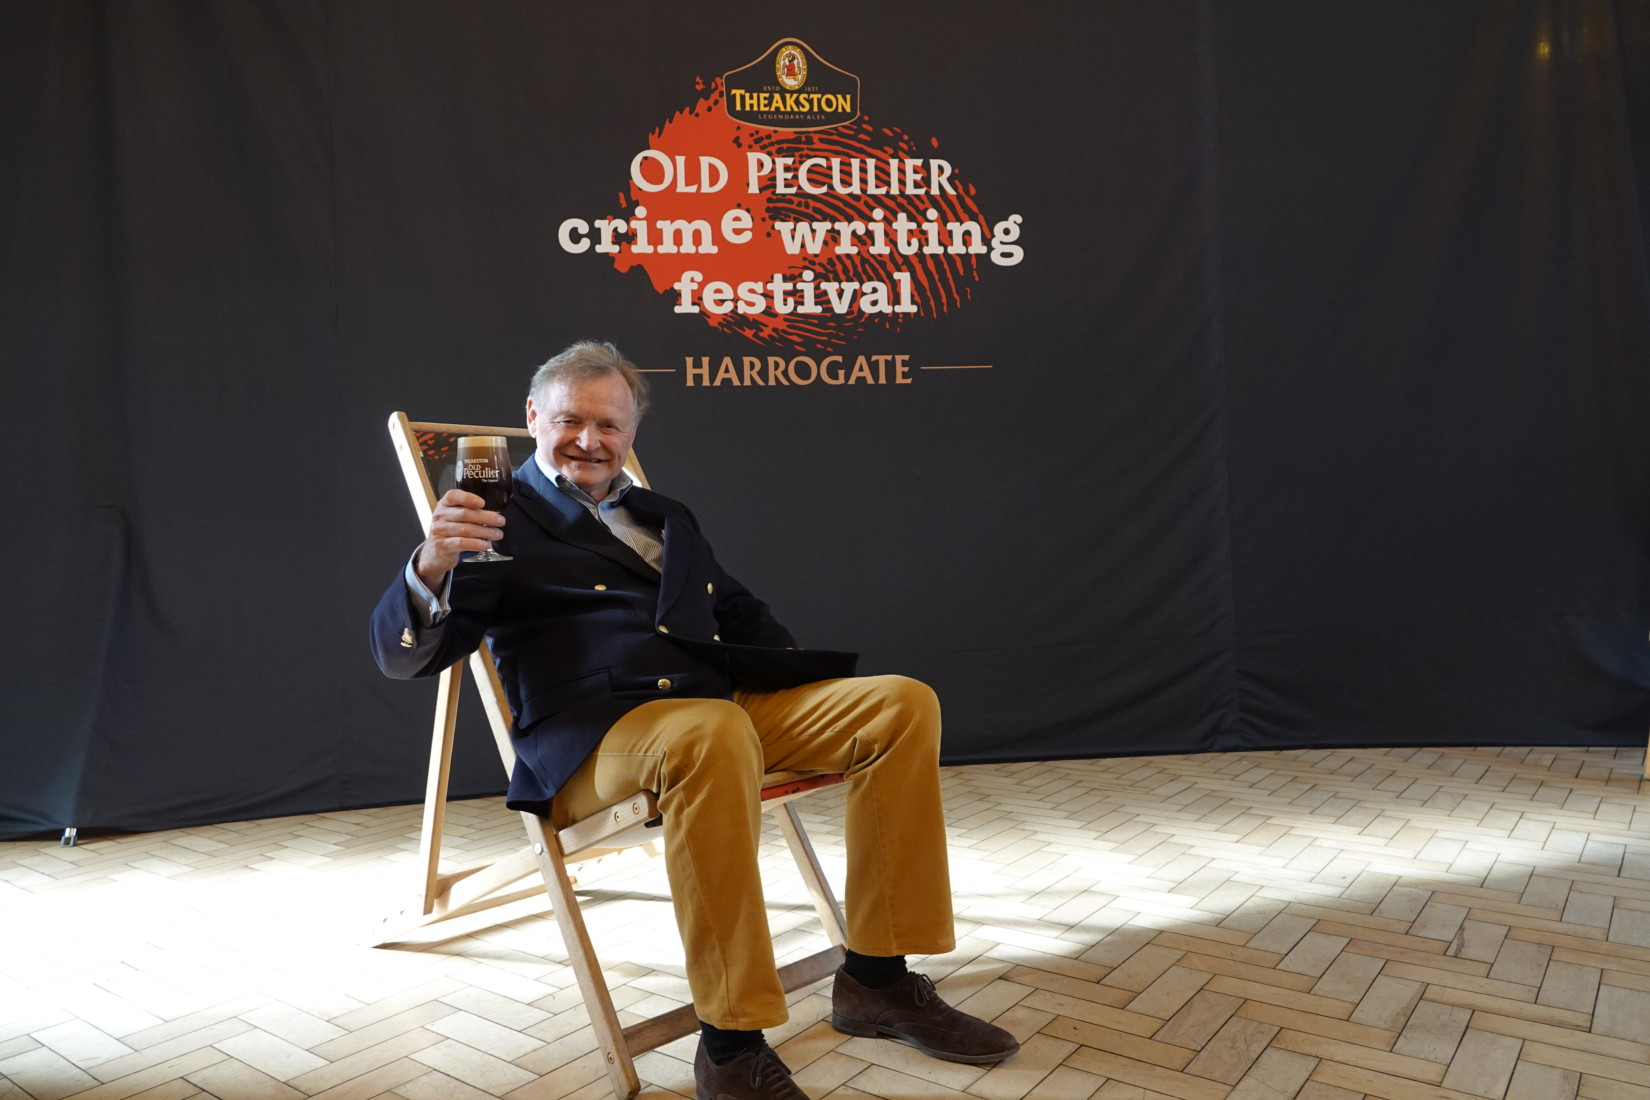 Simon Theakston at the London launch of Theakston Old Peculier Crime Writing Festival